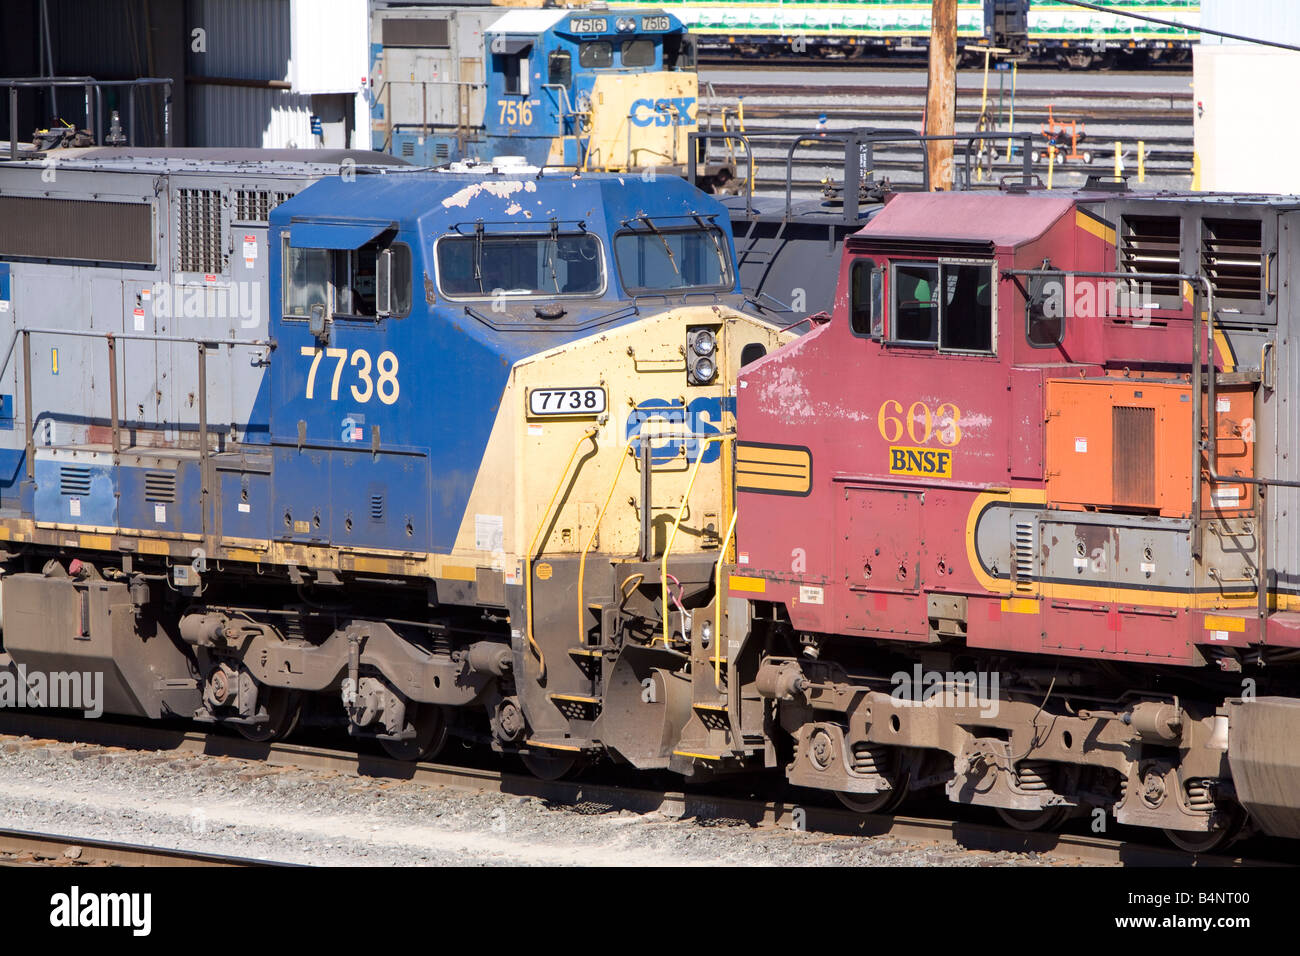 CSX and BNSF General Electric locomotives parked at the CSX Selkirk Yard in Selkirk NY. Stock Photo